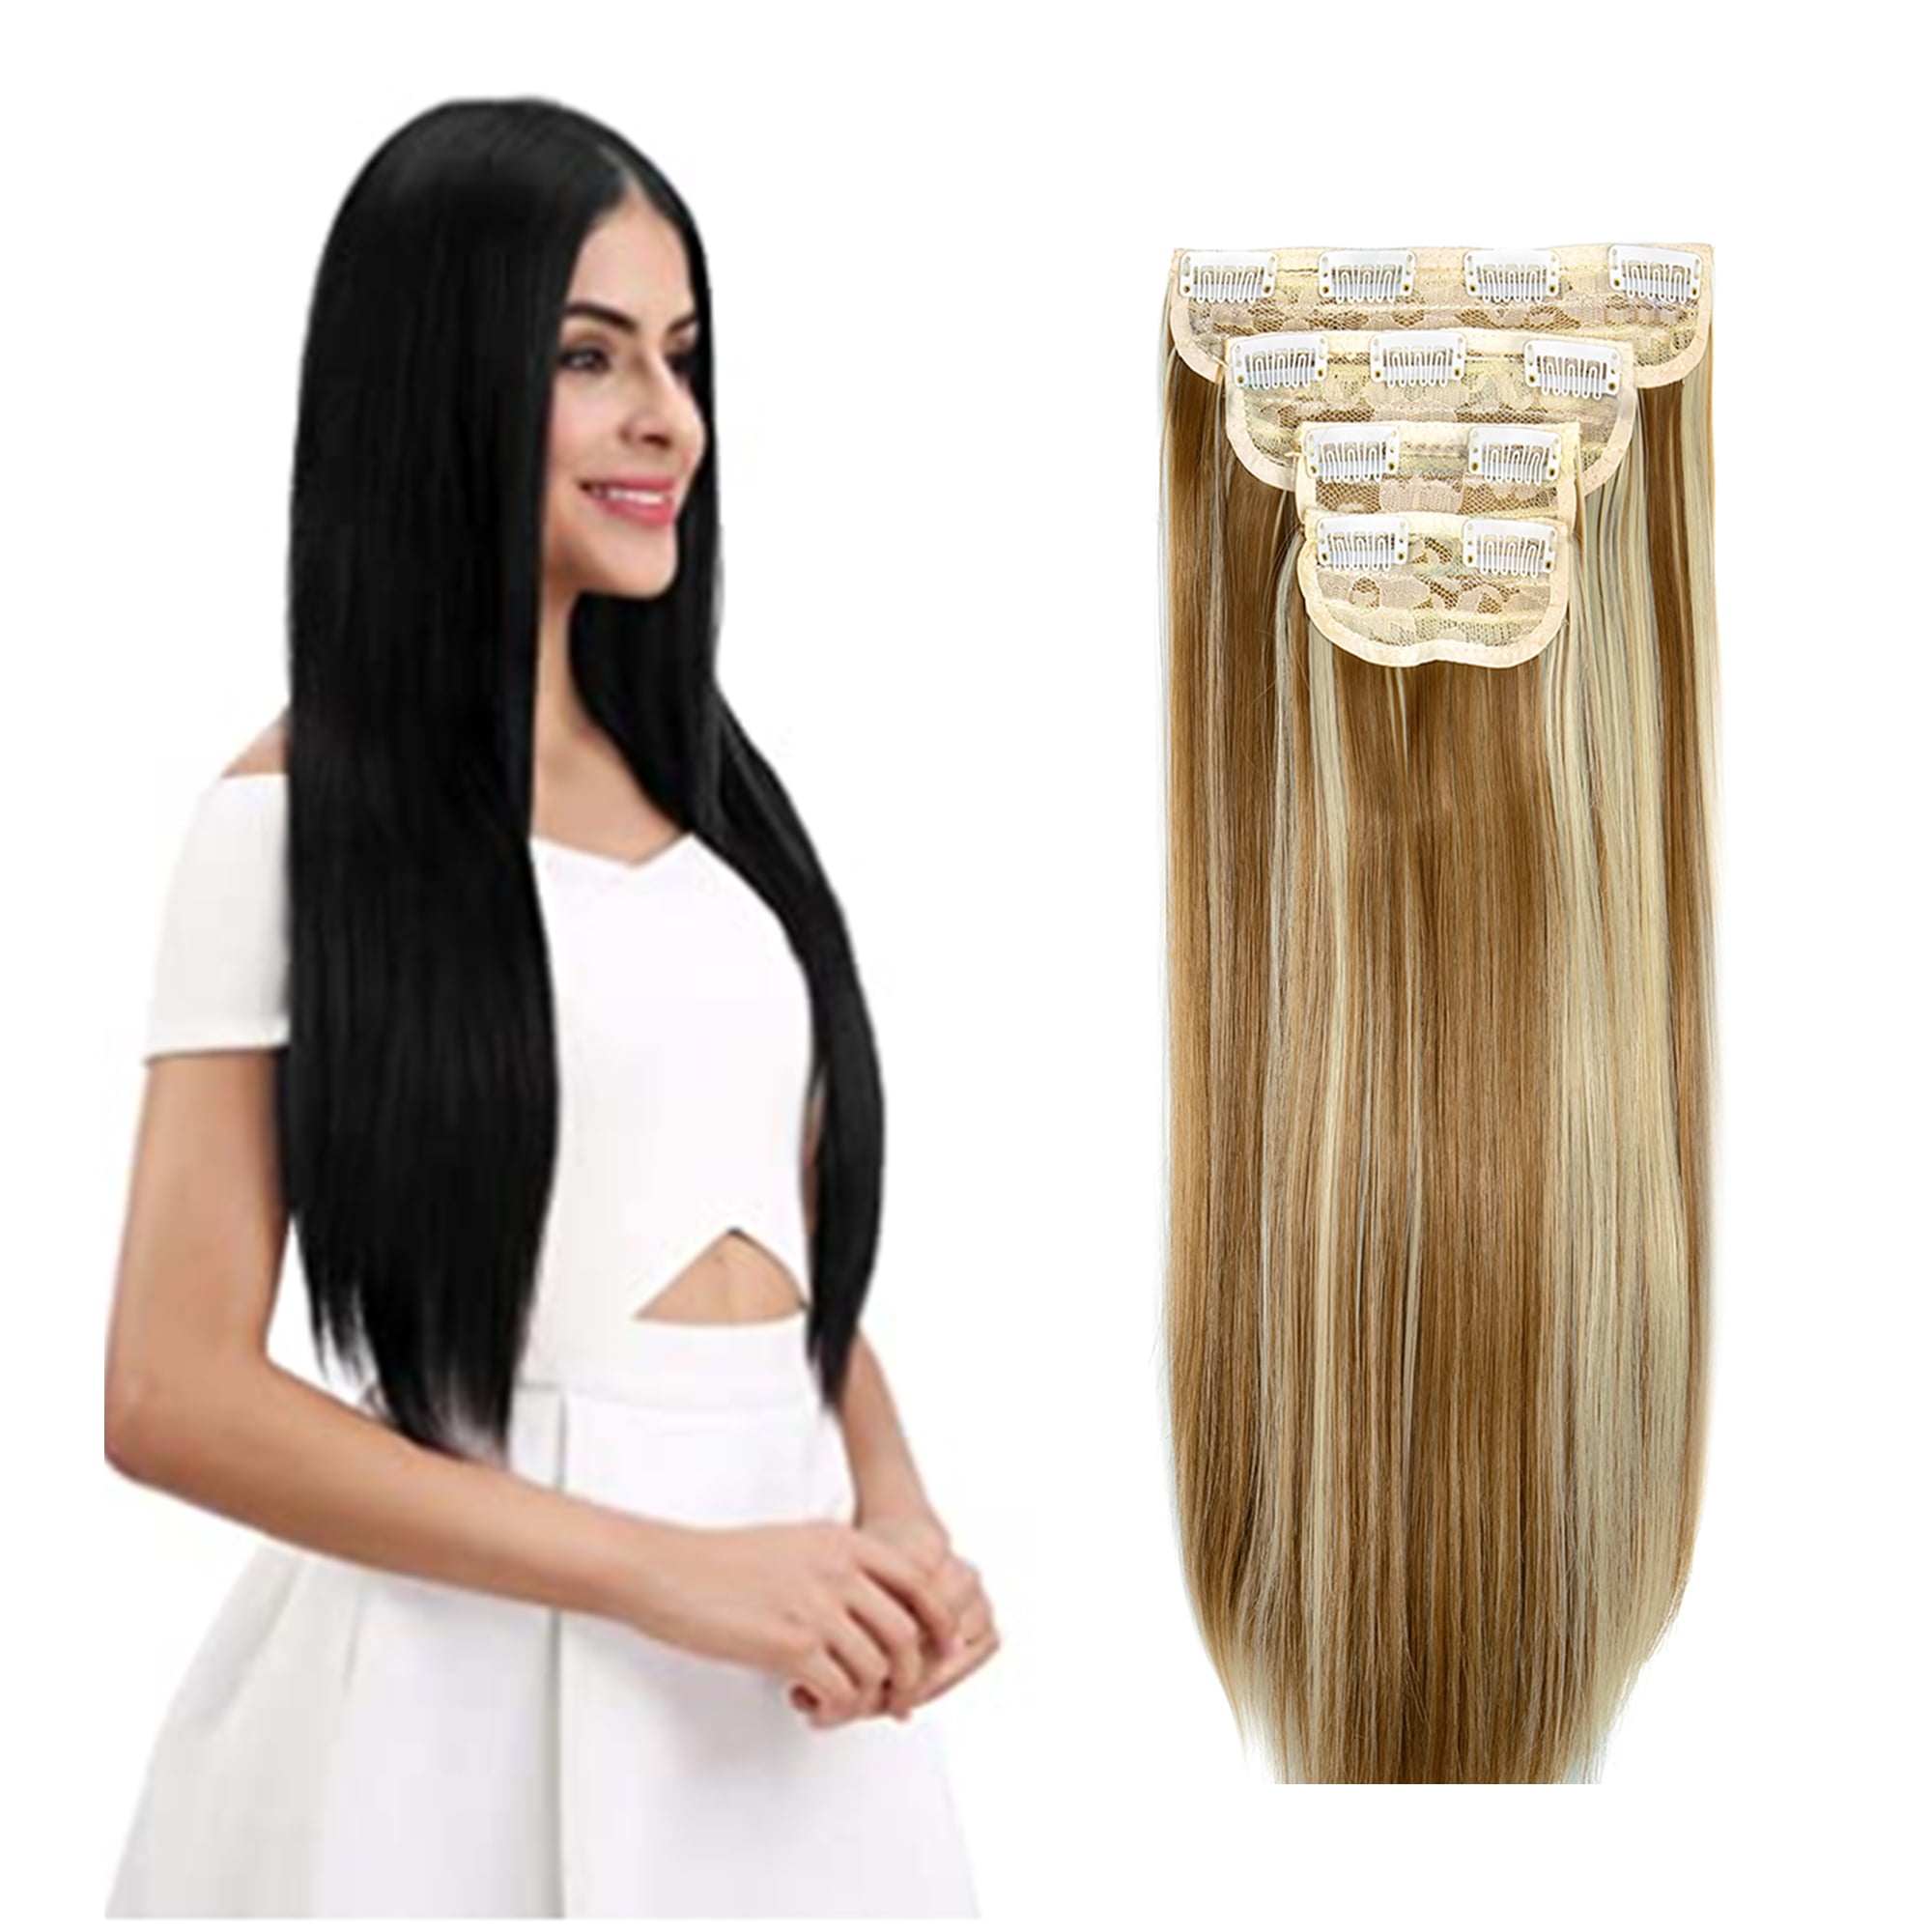 4Pcs Clip in Straight Hair Extensions, Natural Straight Hairpieces with 11  Clips, 18/24 inch Long Soft Clip on Extensions Hair Pieces for Women - Dark  Brown 260g Per Set 